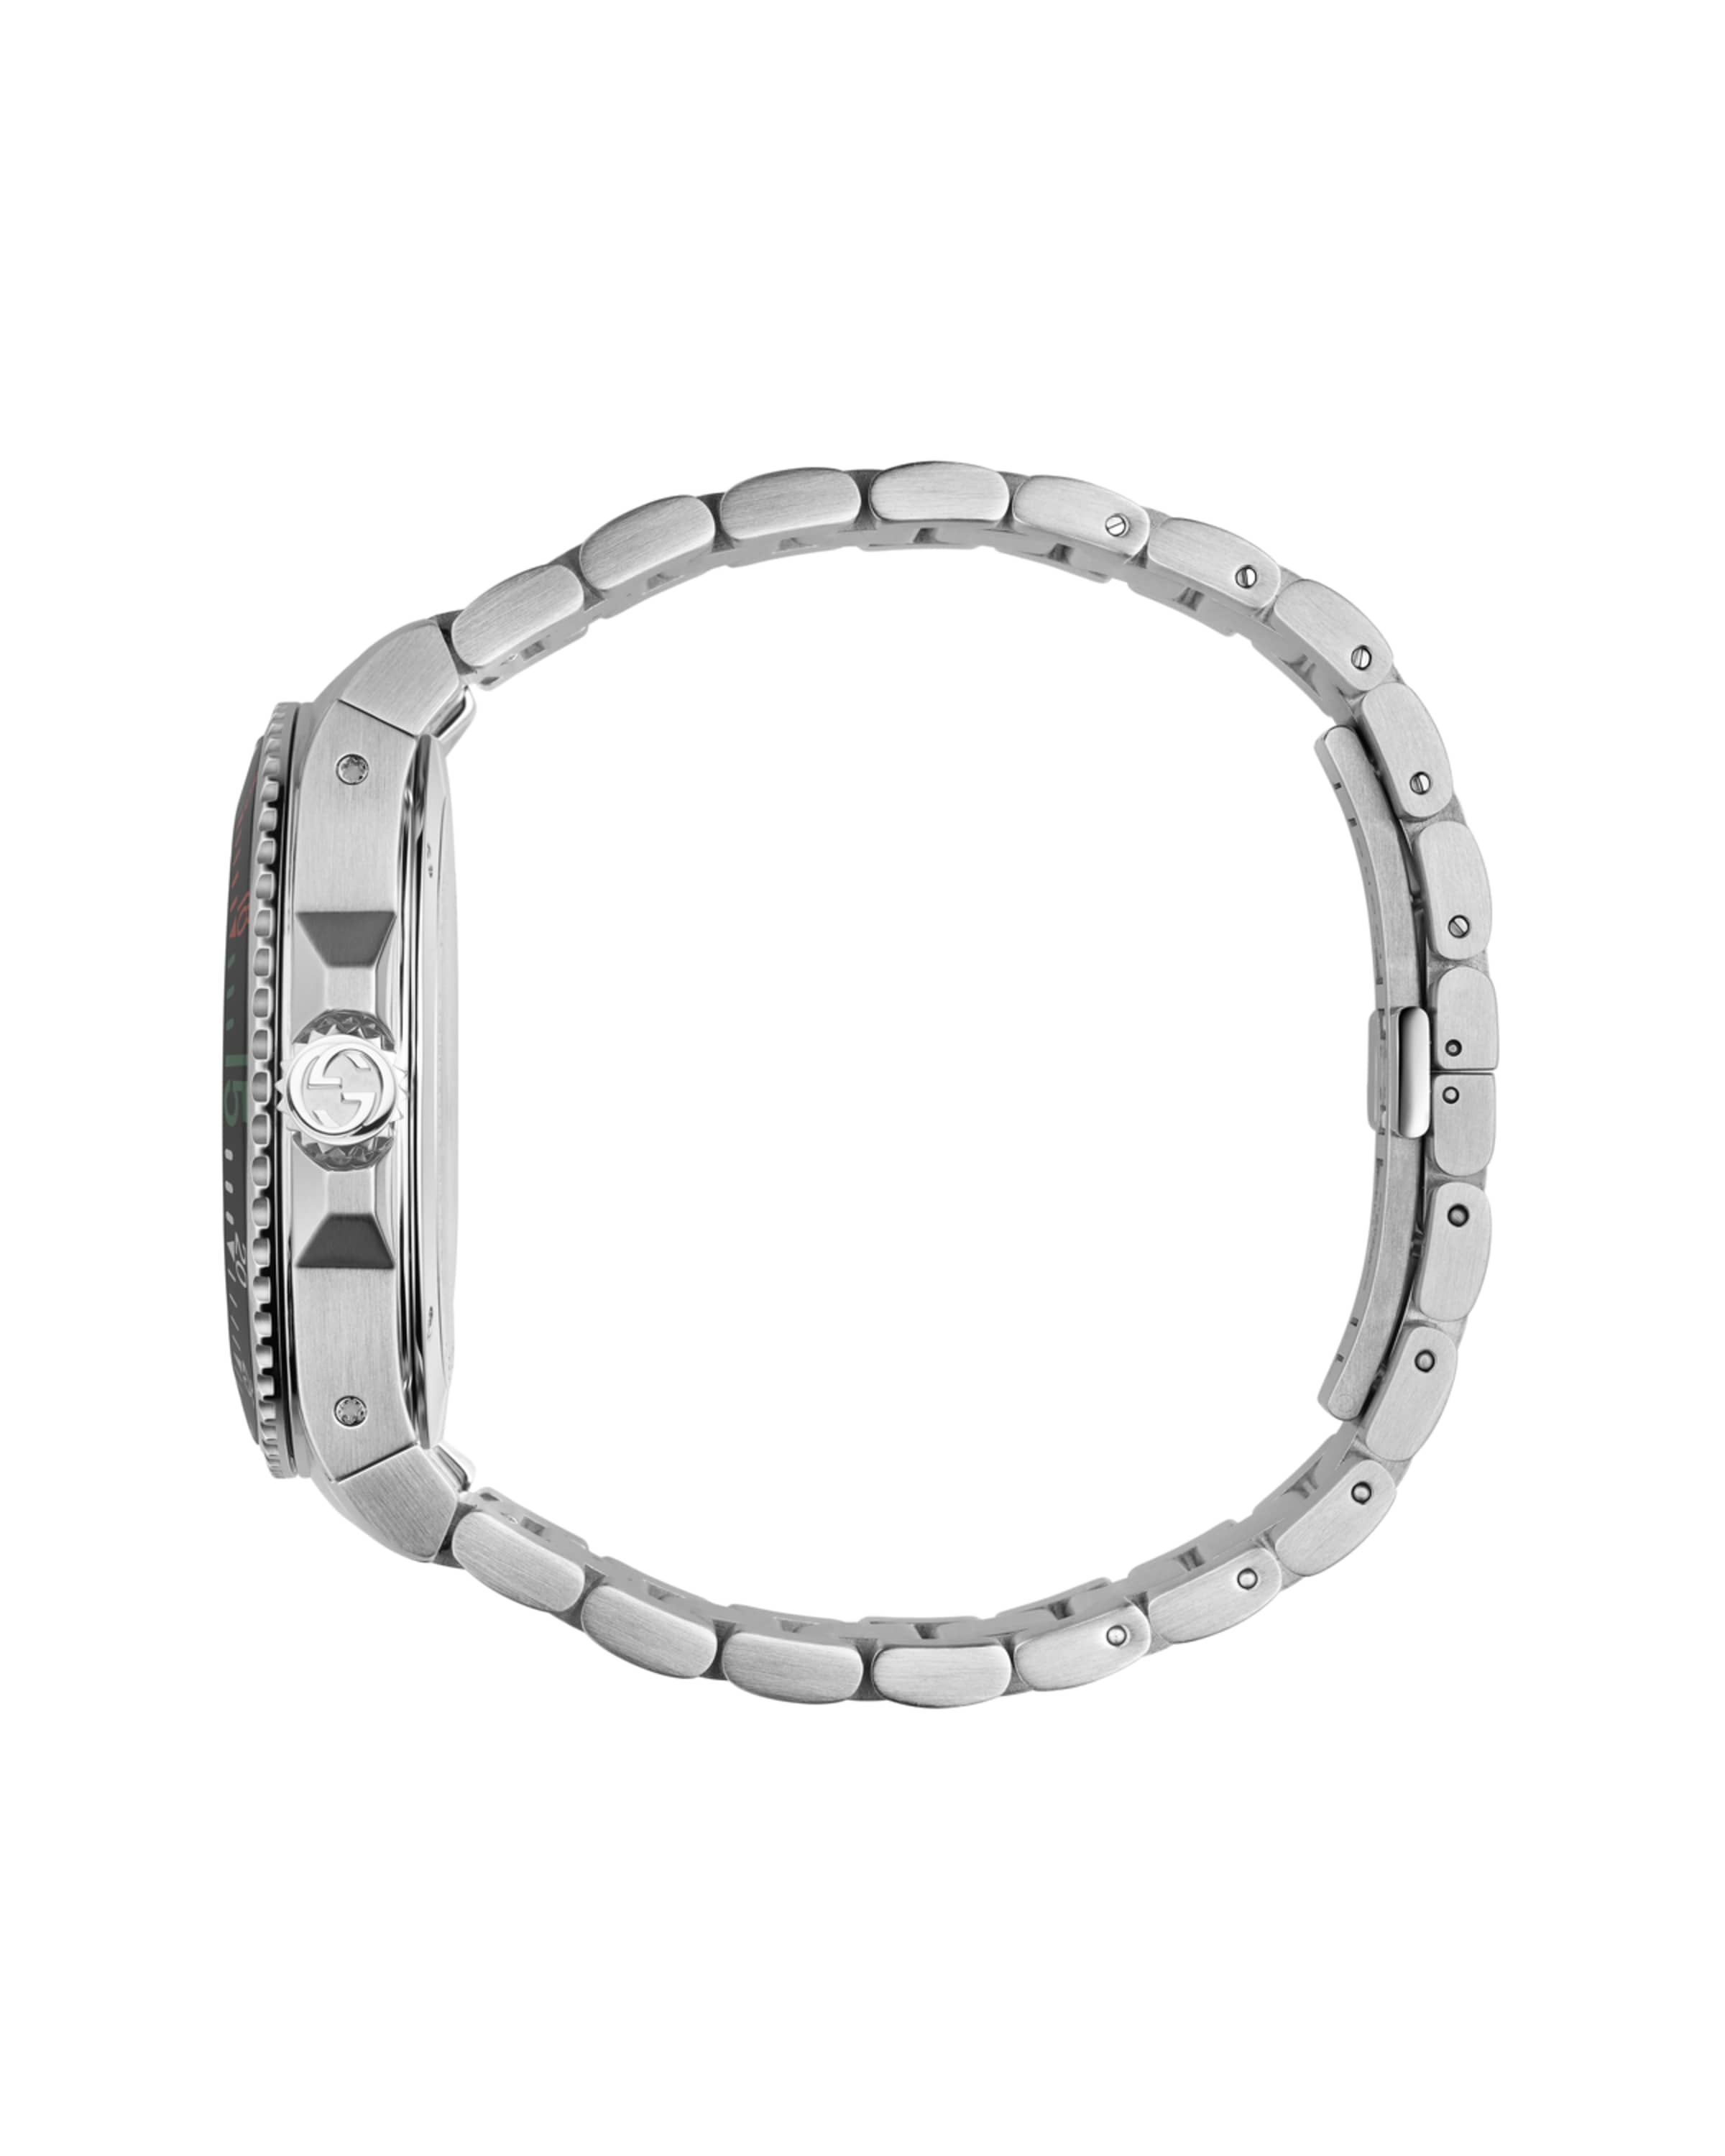 45mm Gucci Dive Stainless Steel Bracelet Watch - 4